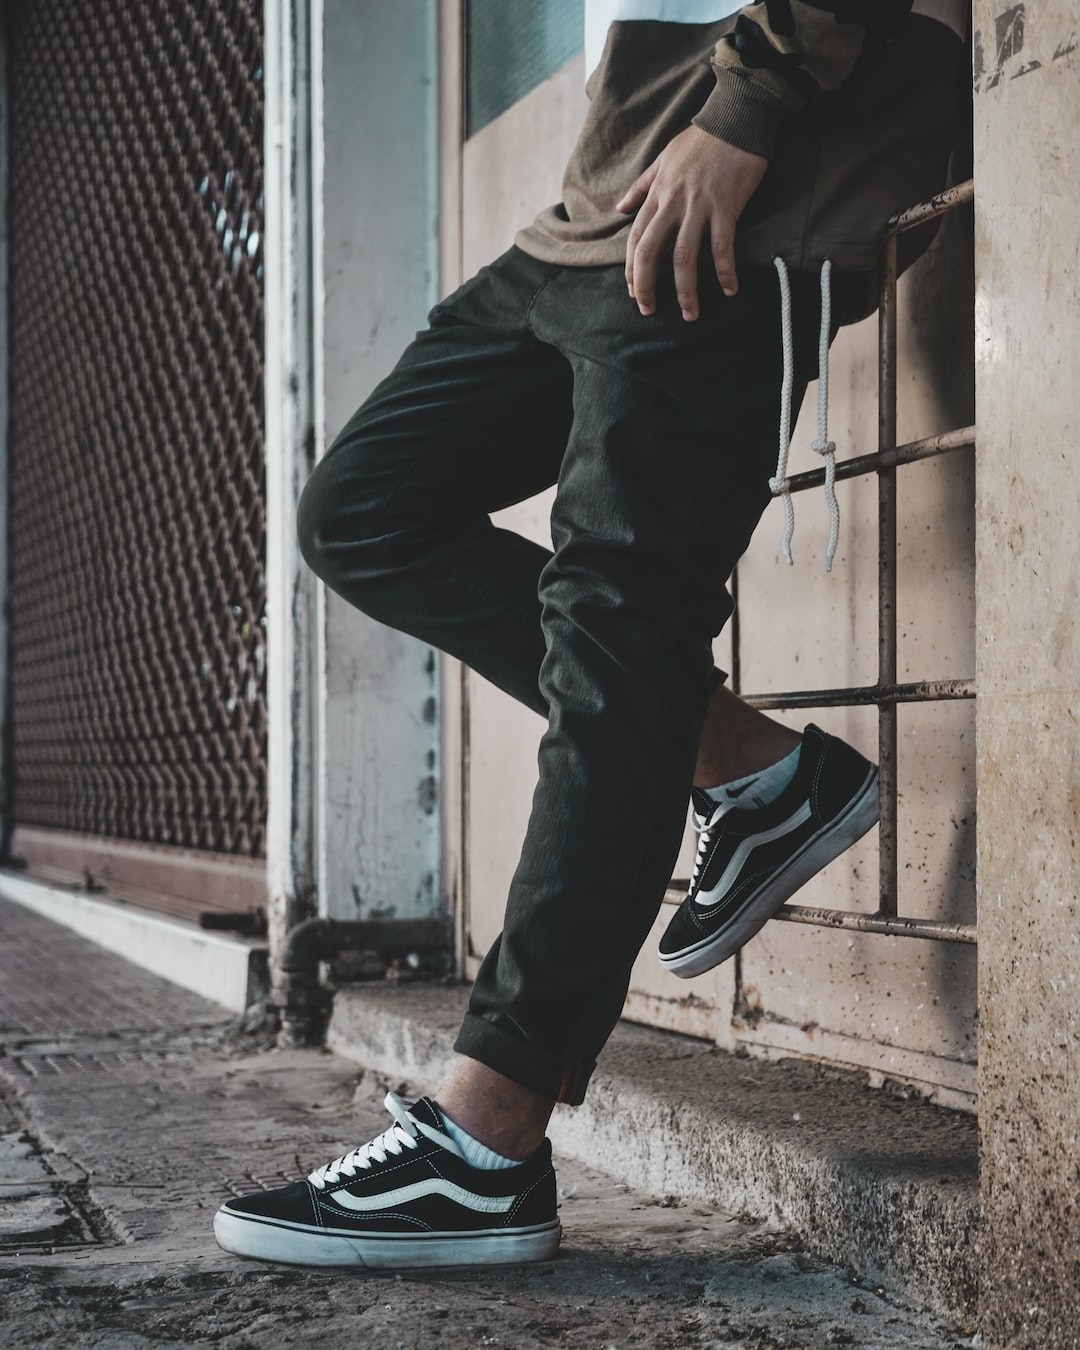 a man leaning against a wall wearing black and white sneakers